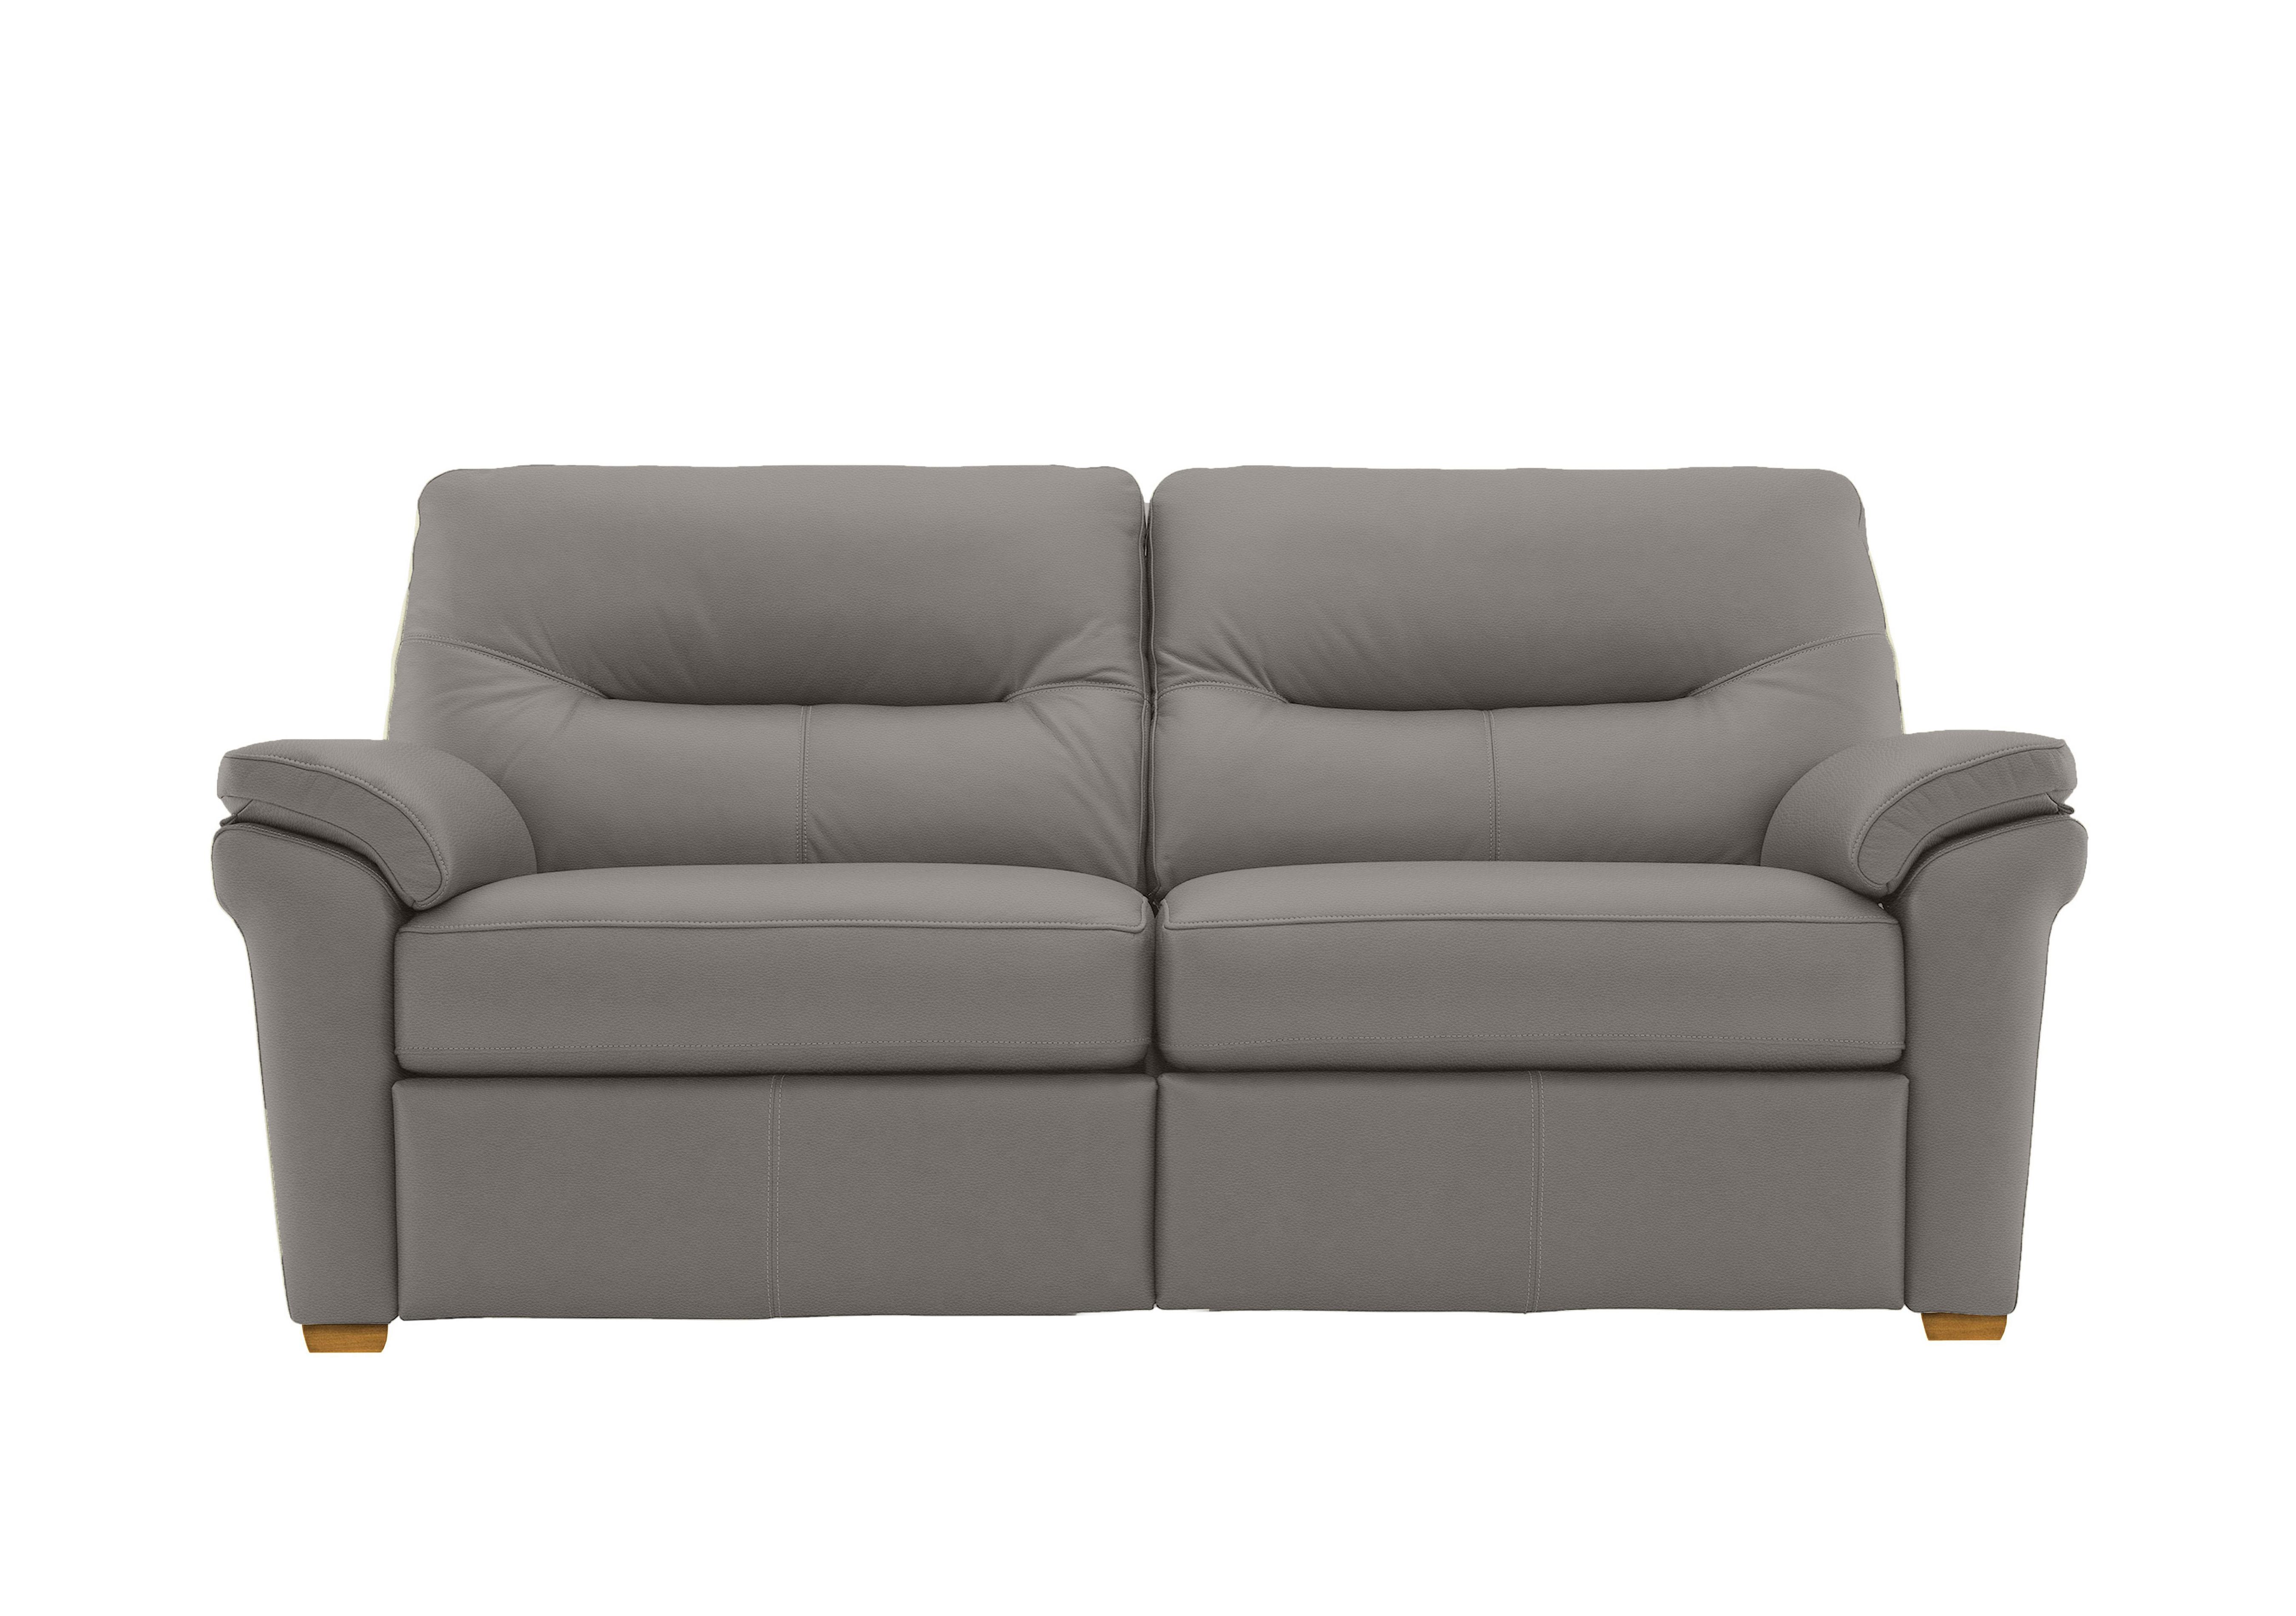 Seattle 3 Seater Leather Sofa with Wooden Feet in L842 Cambridge Grey Ok on Furniture Village